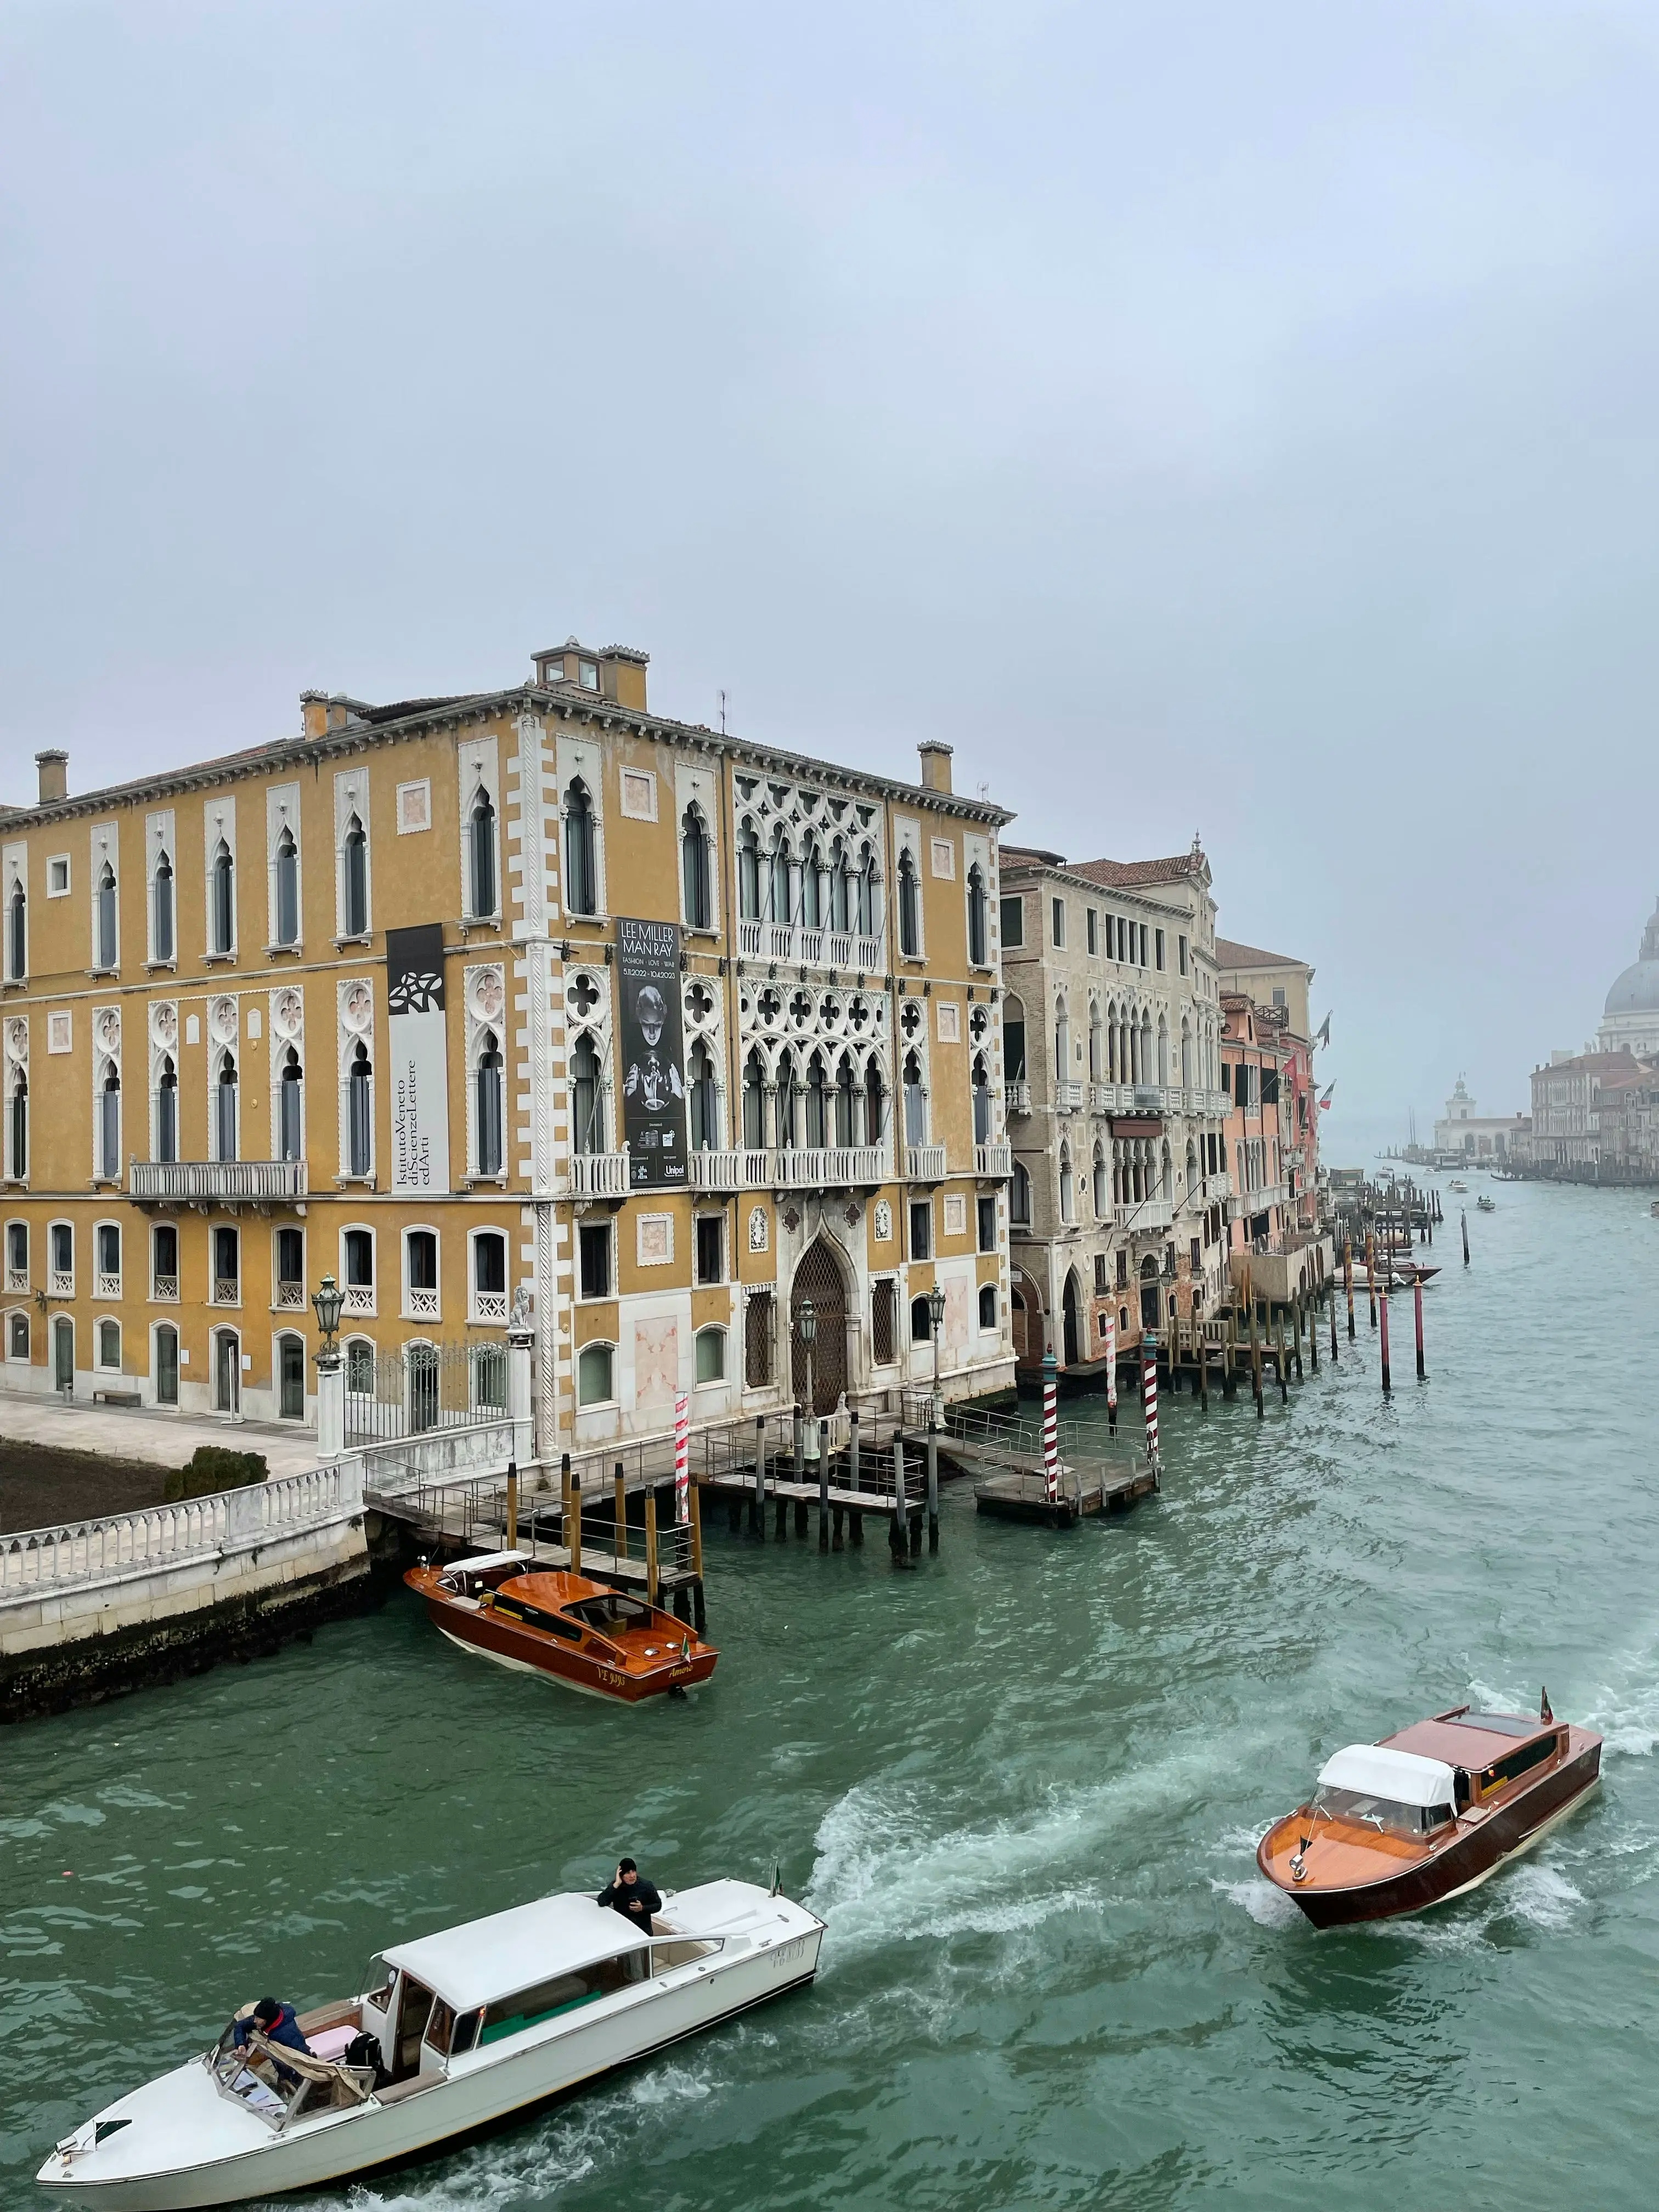 A Traveler's Guide To The Accademia Gallery In Venice